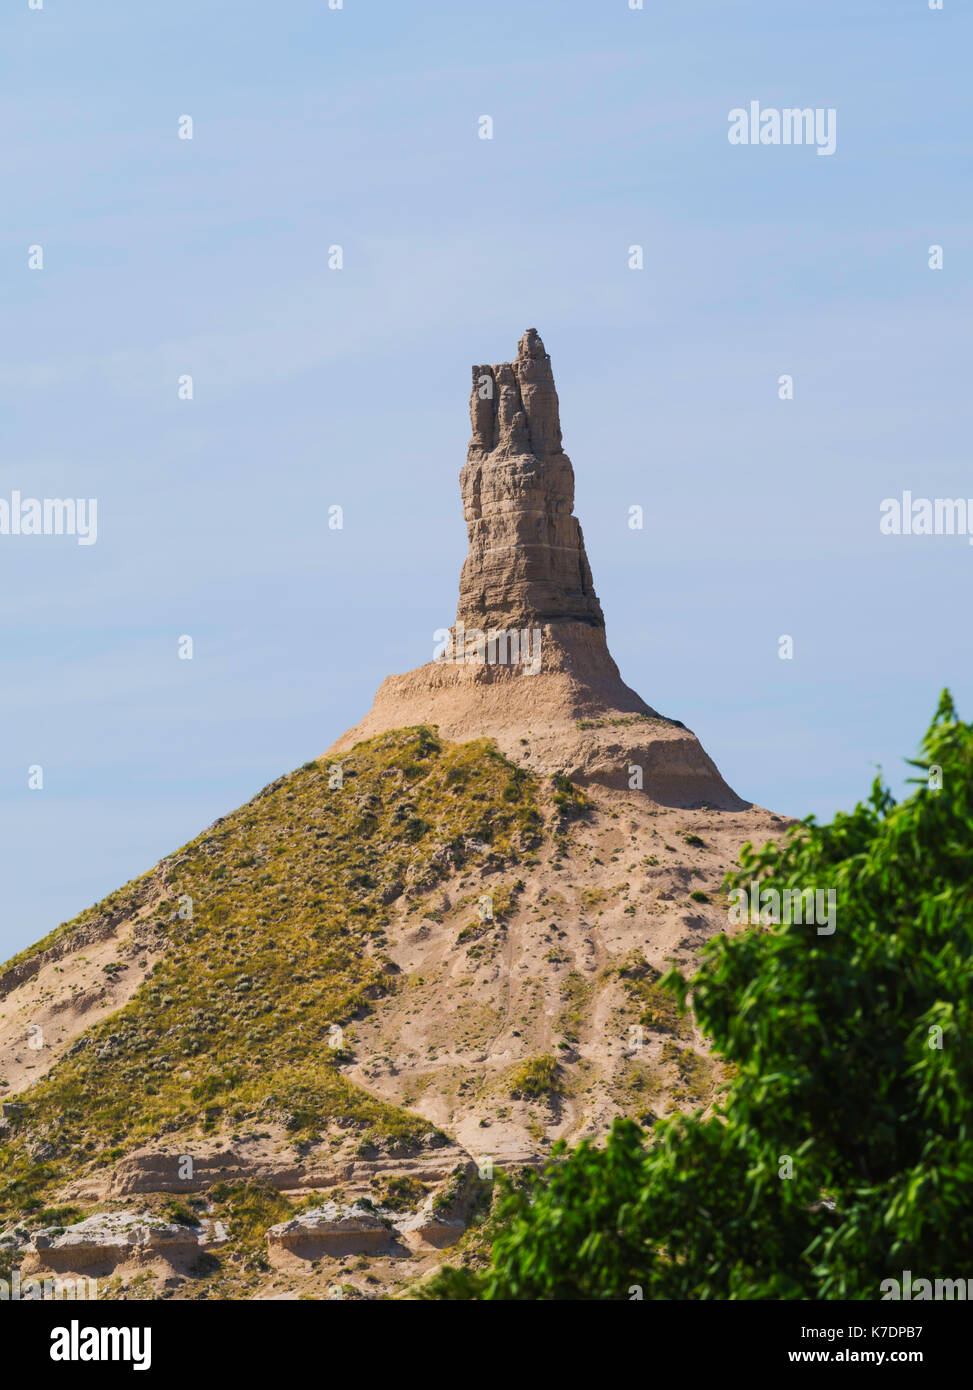 View of Chimney Rock National Historic Site, a natural landmark for westtern travellers. Stock Photo